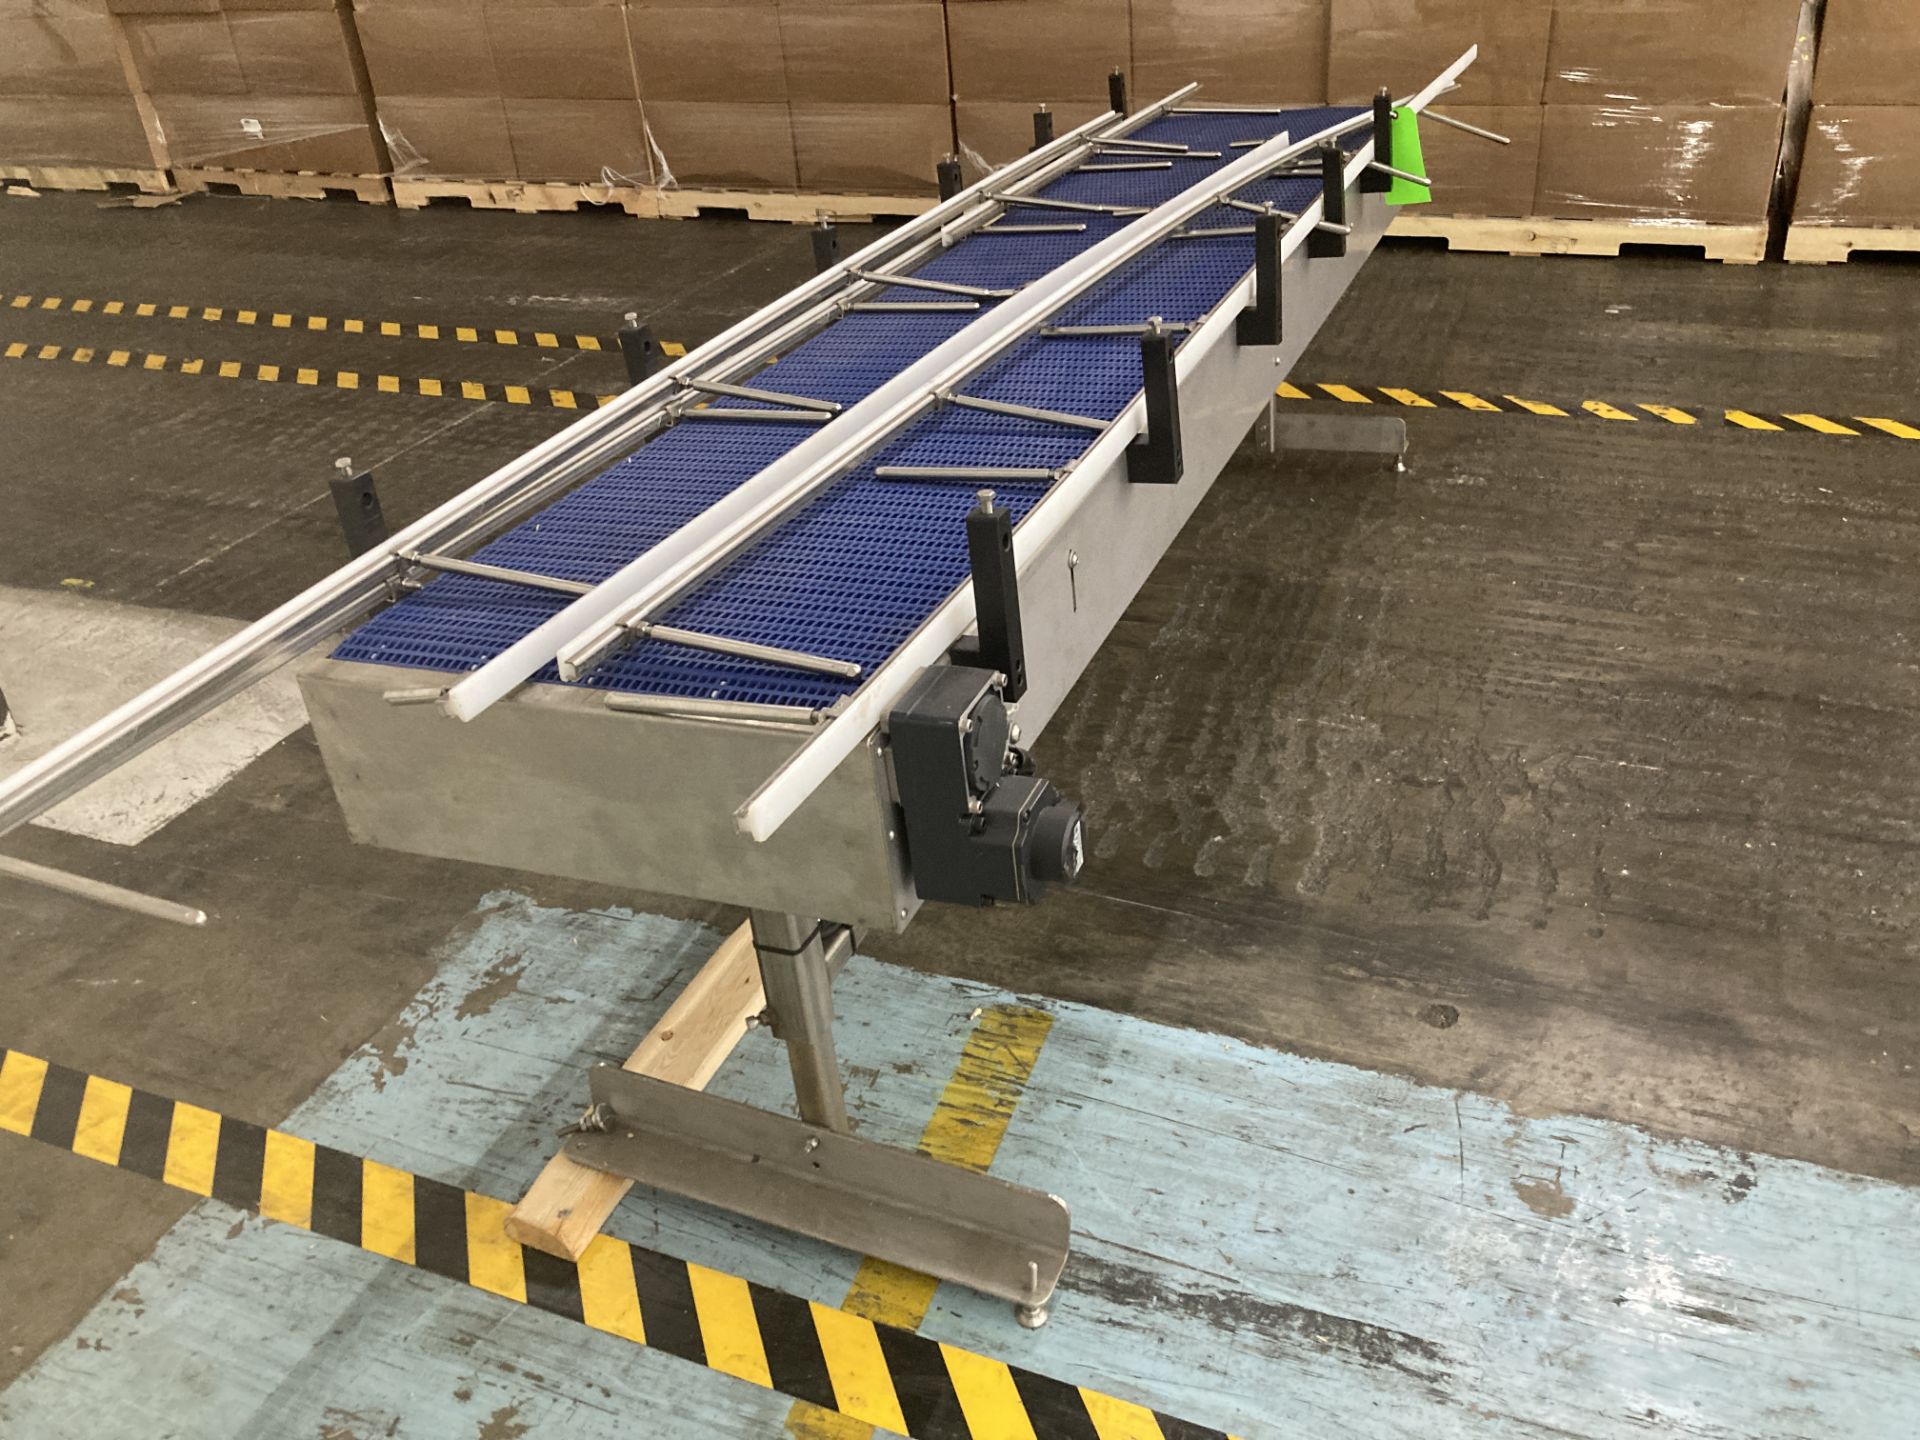 Stainless steel frame mattop conveyor system , 20 in w x 98 in lg Rigging Fee: $ 100 - Image 2 of 2